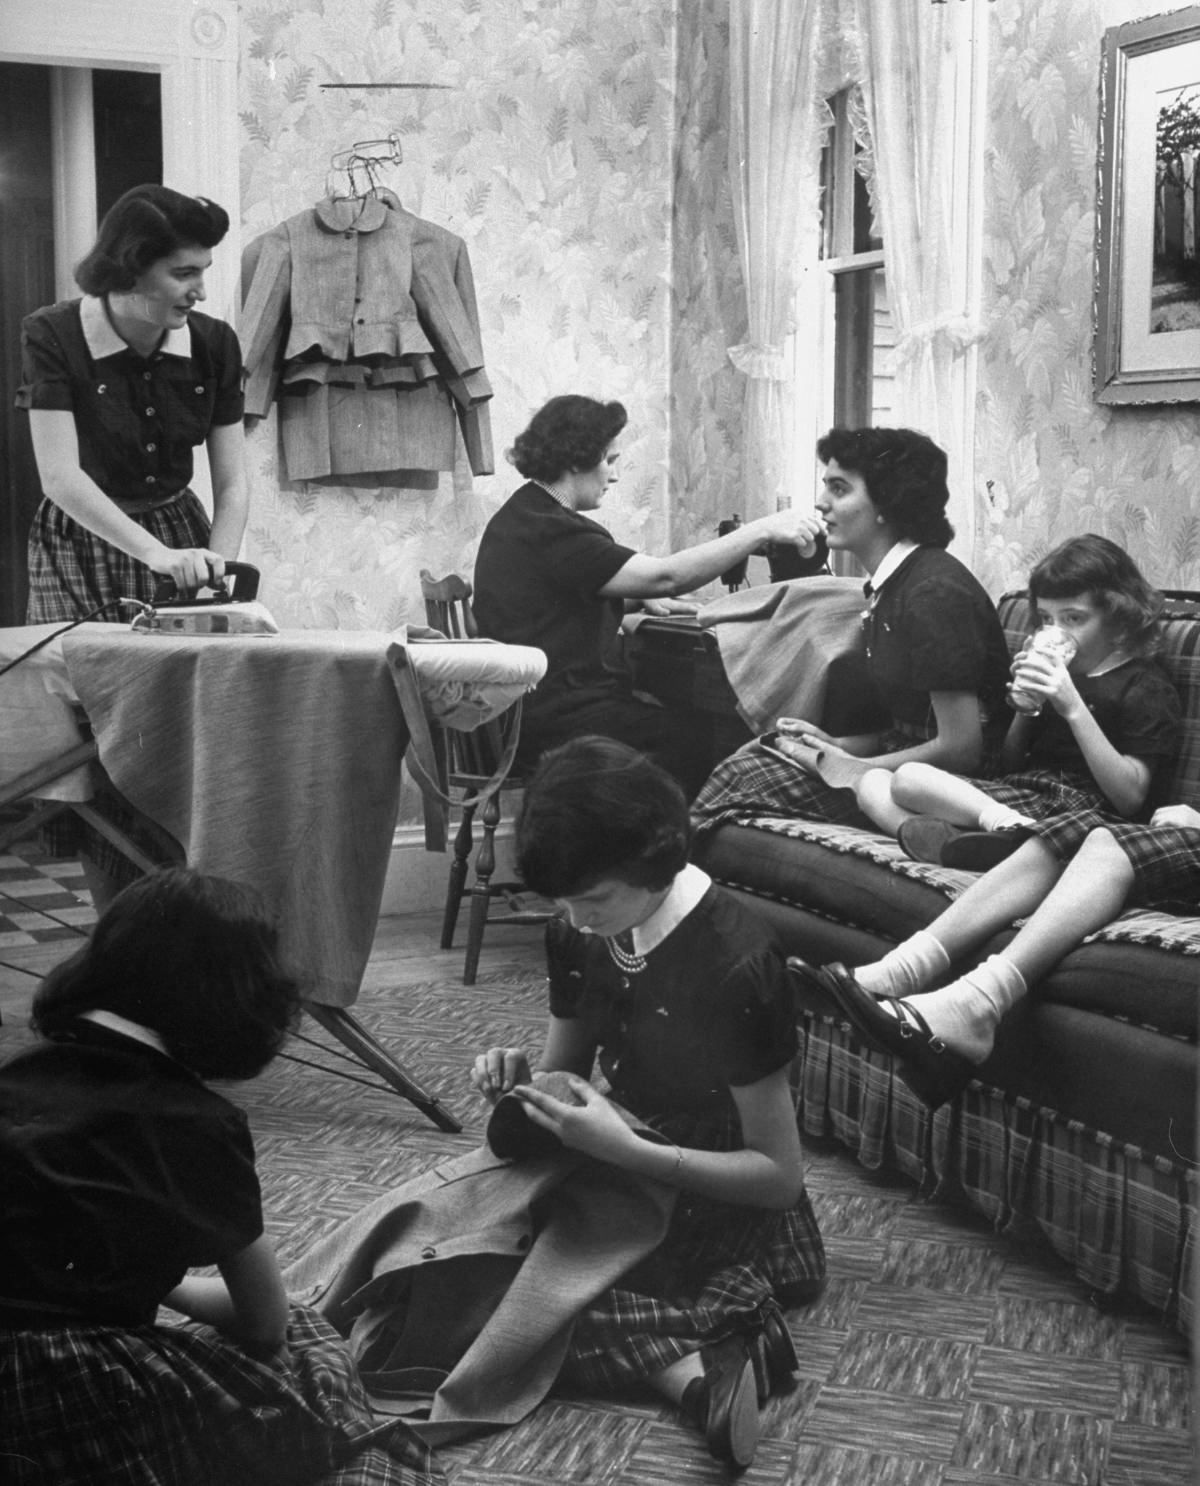 One of the sisters, Jane, ironed a skirt while her mother and sisters worked another suit in preparation for Easter, 1952.